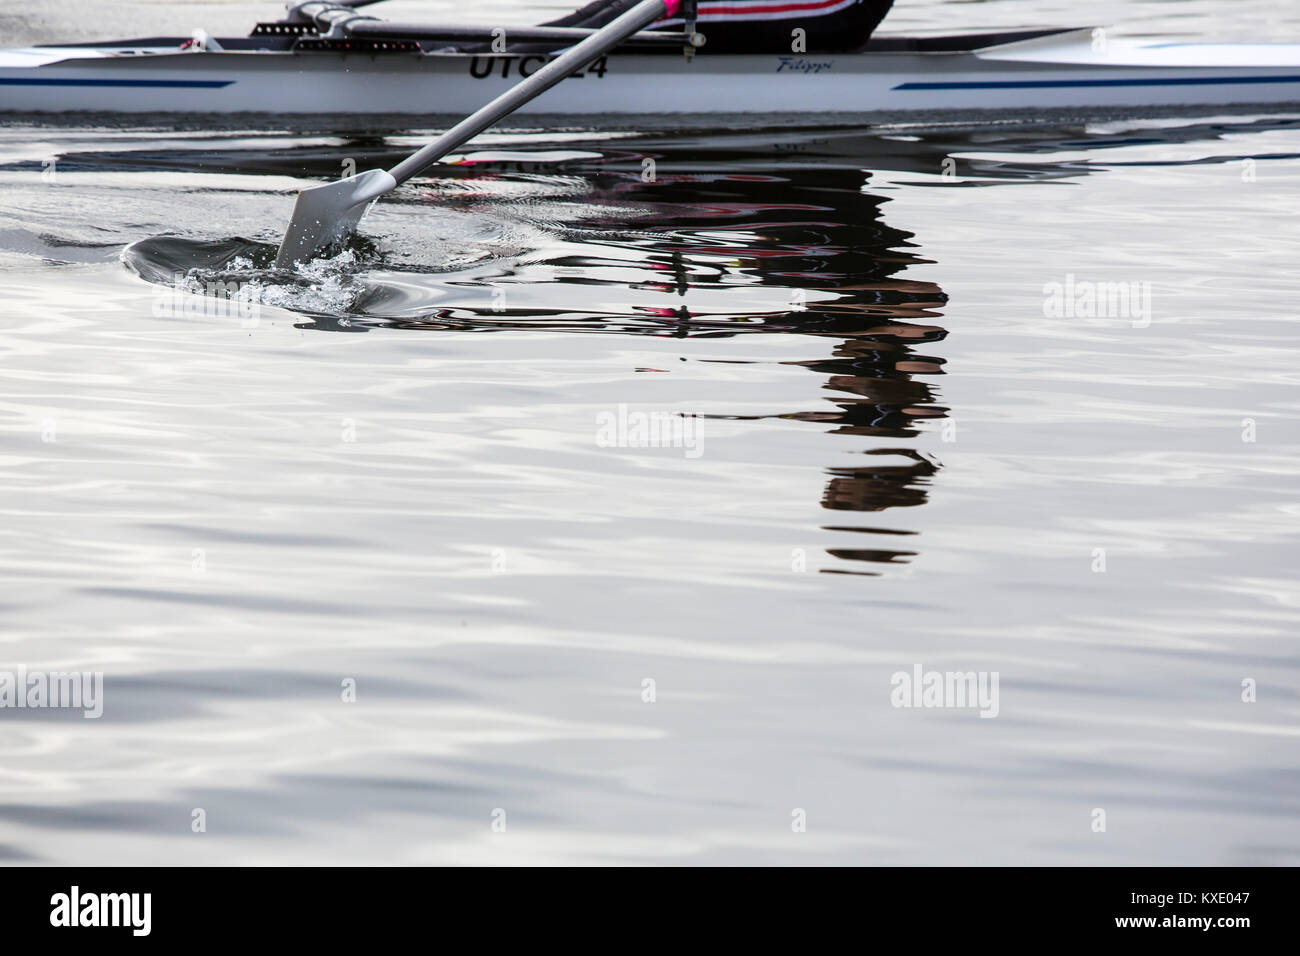 A single rower on a river skulling through the gently rippling water. Stock Photo